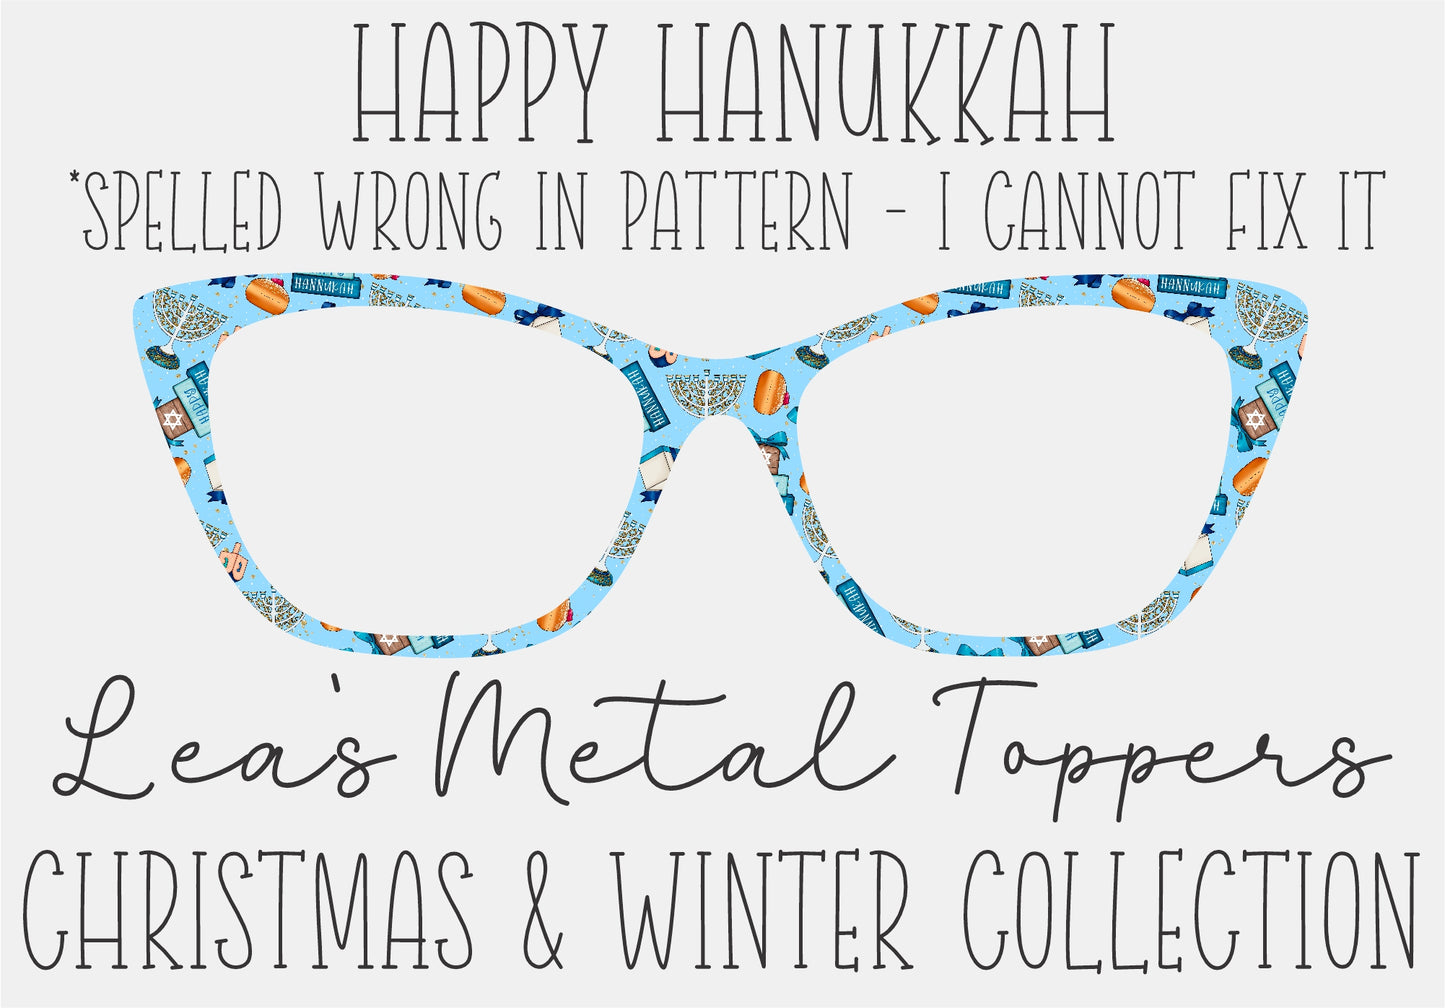 HAPPY HANNUKAH Eyewear Frame Toppers COMES WITH MAGNETS